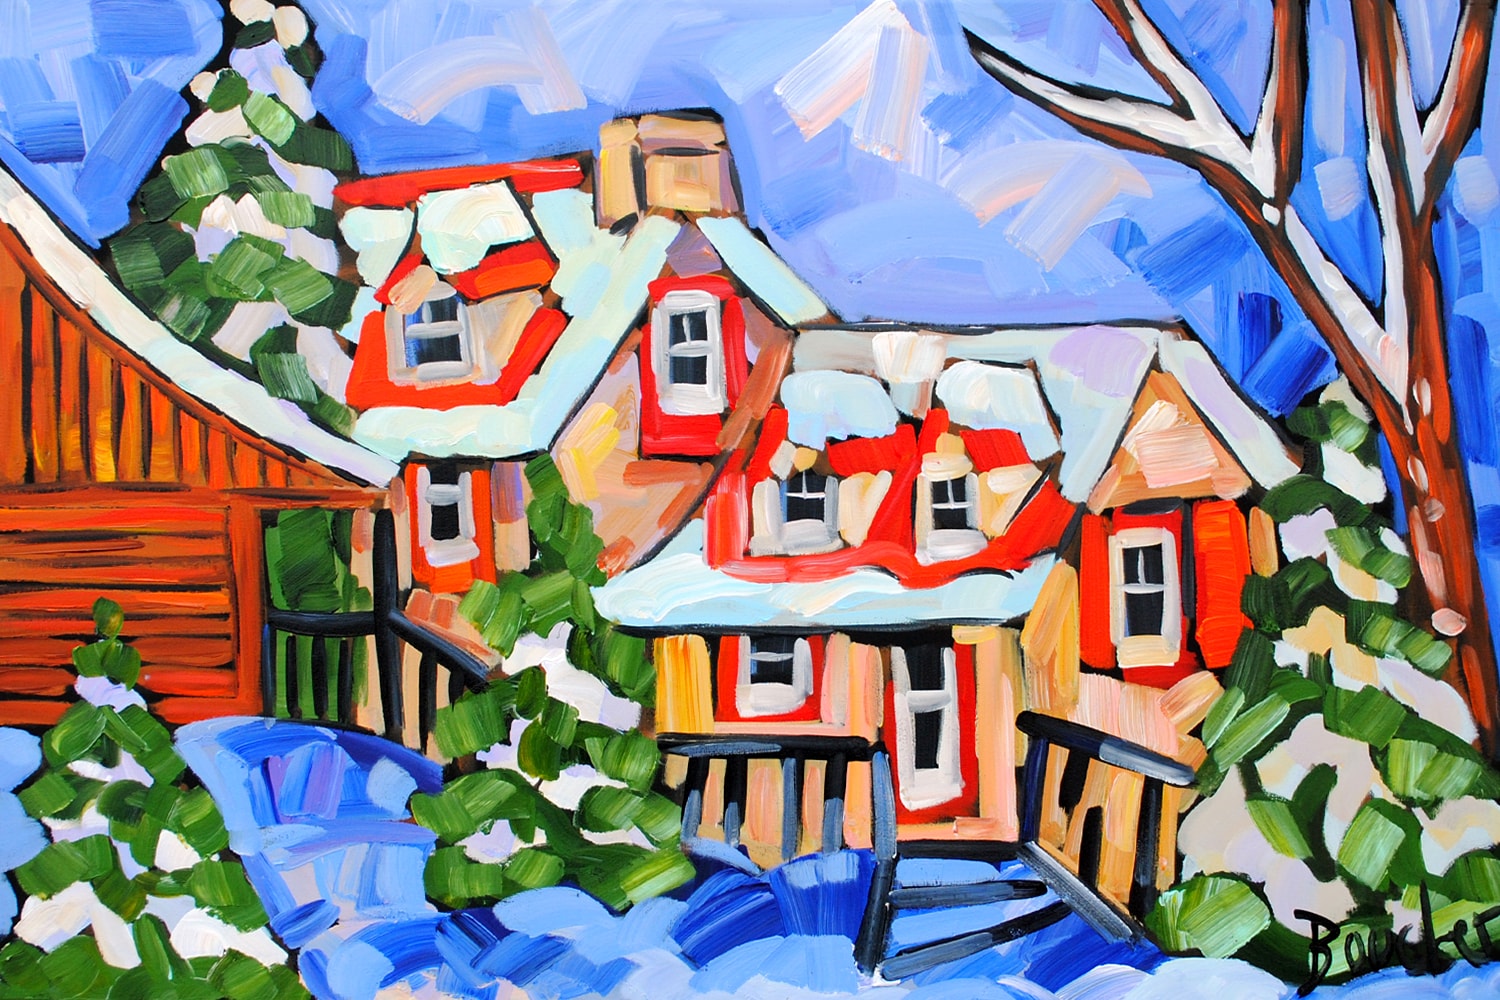 Original painting by Marie-Claude Boucher, acrylic on canvas, winter scene, 24x36 inches